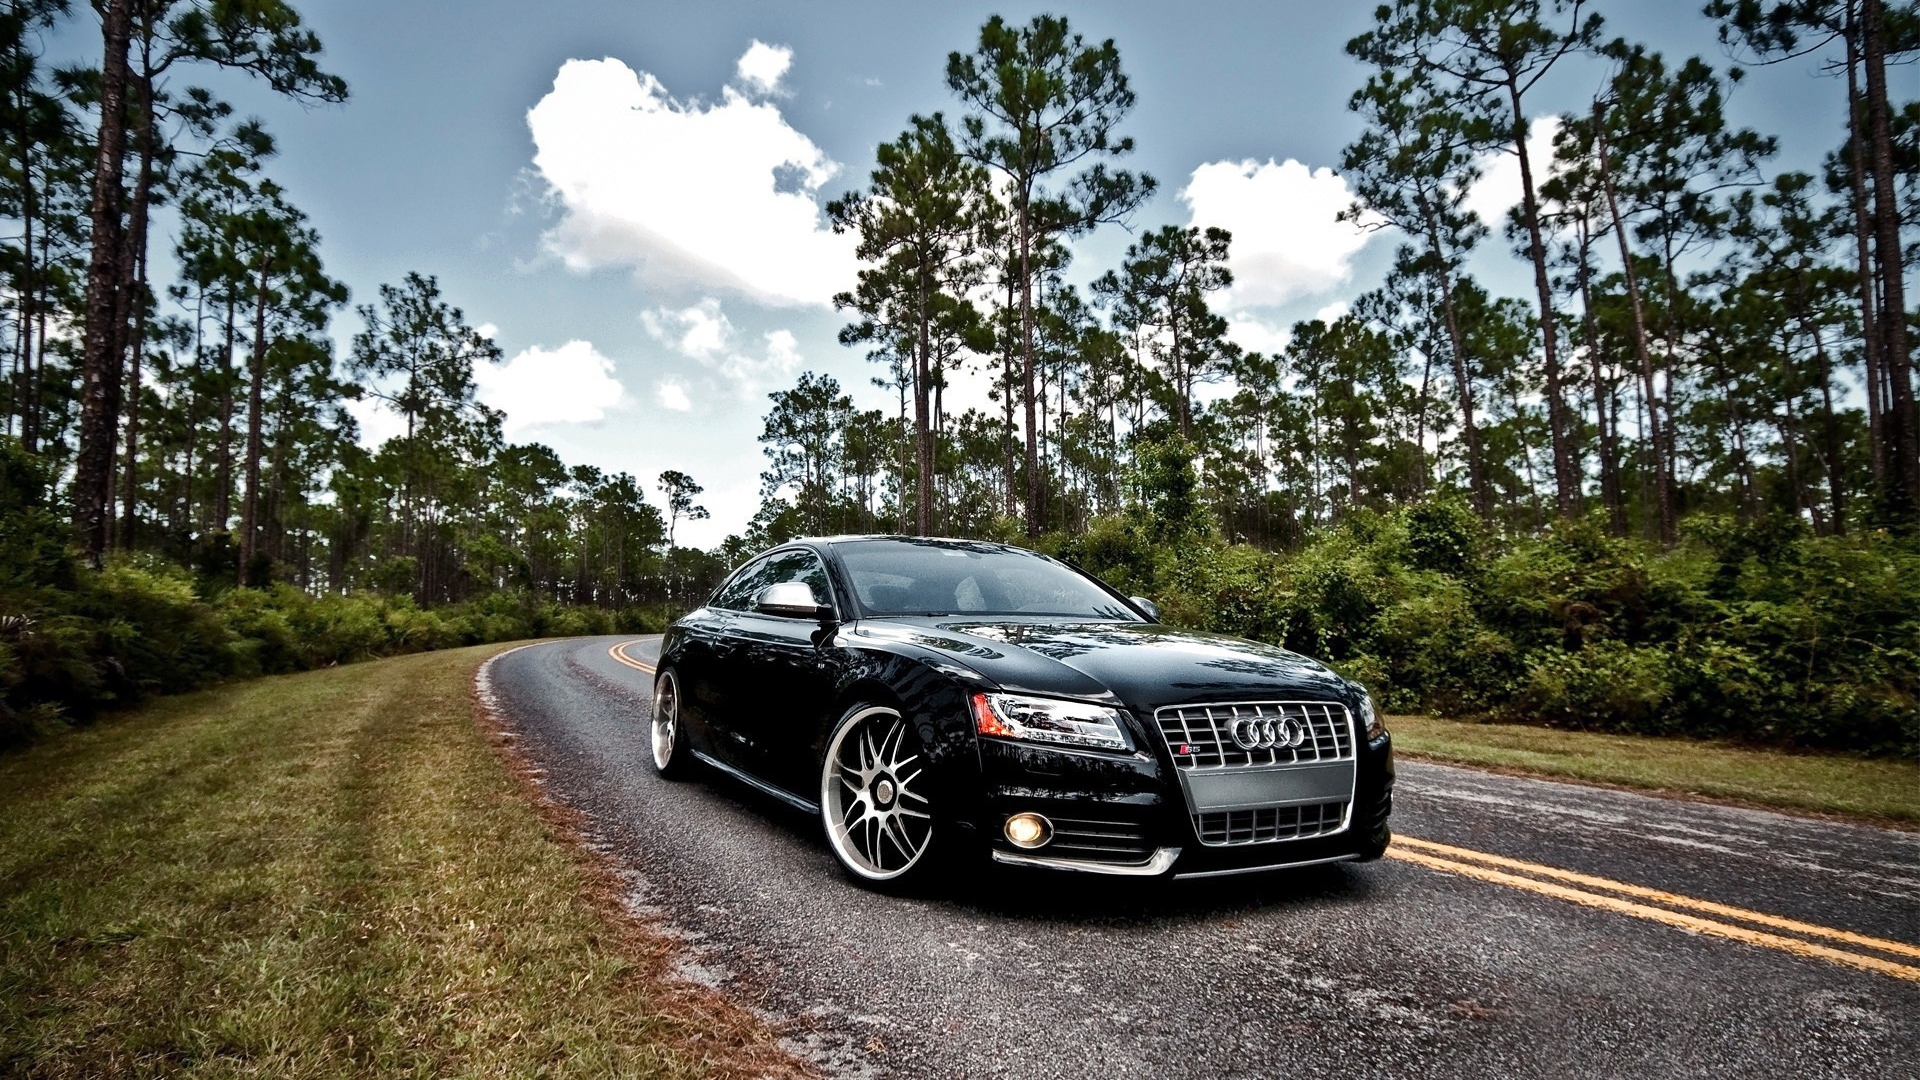 Luxury black Audi S5 on the highway in the woods